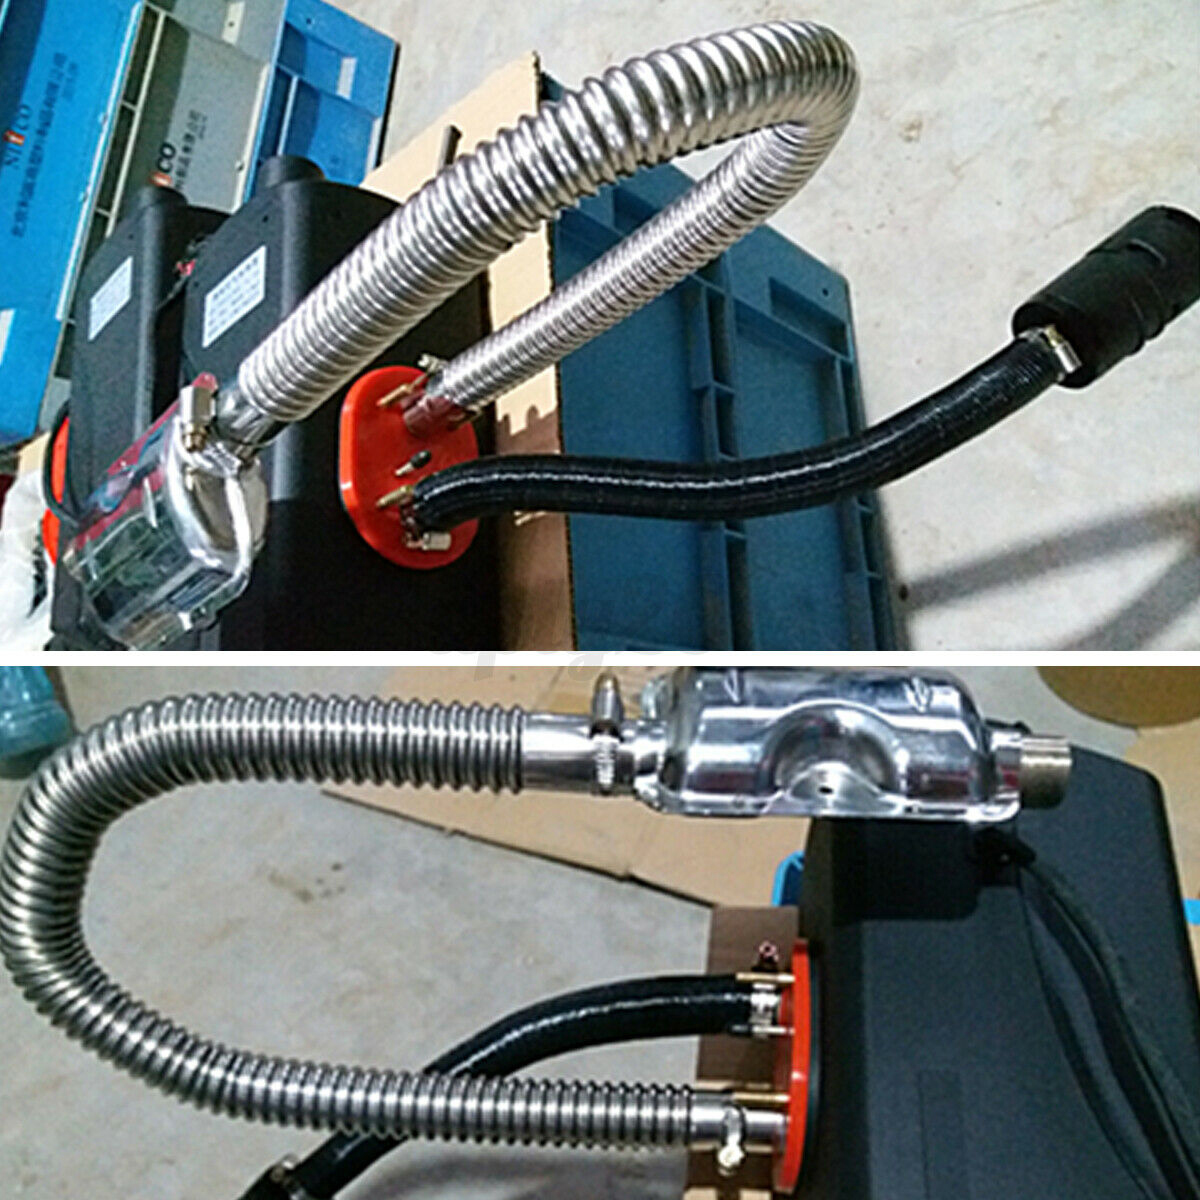 Stainless-Exhaust-Muffler-Silencer-Clamps-Bracket-Gas-Vent-Hose-Portable-180cm-Pipe-Silence-For-Air--1695770-4